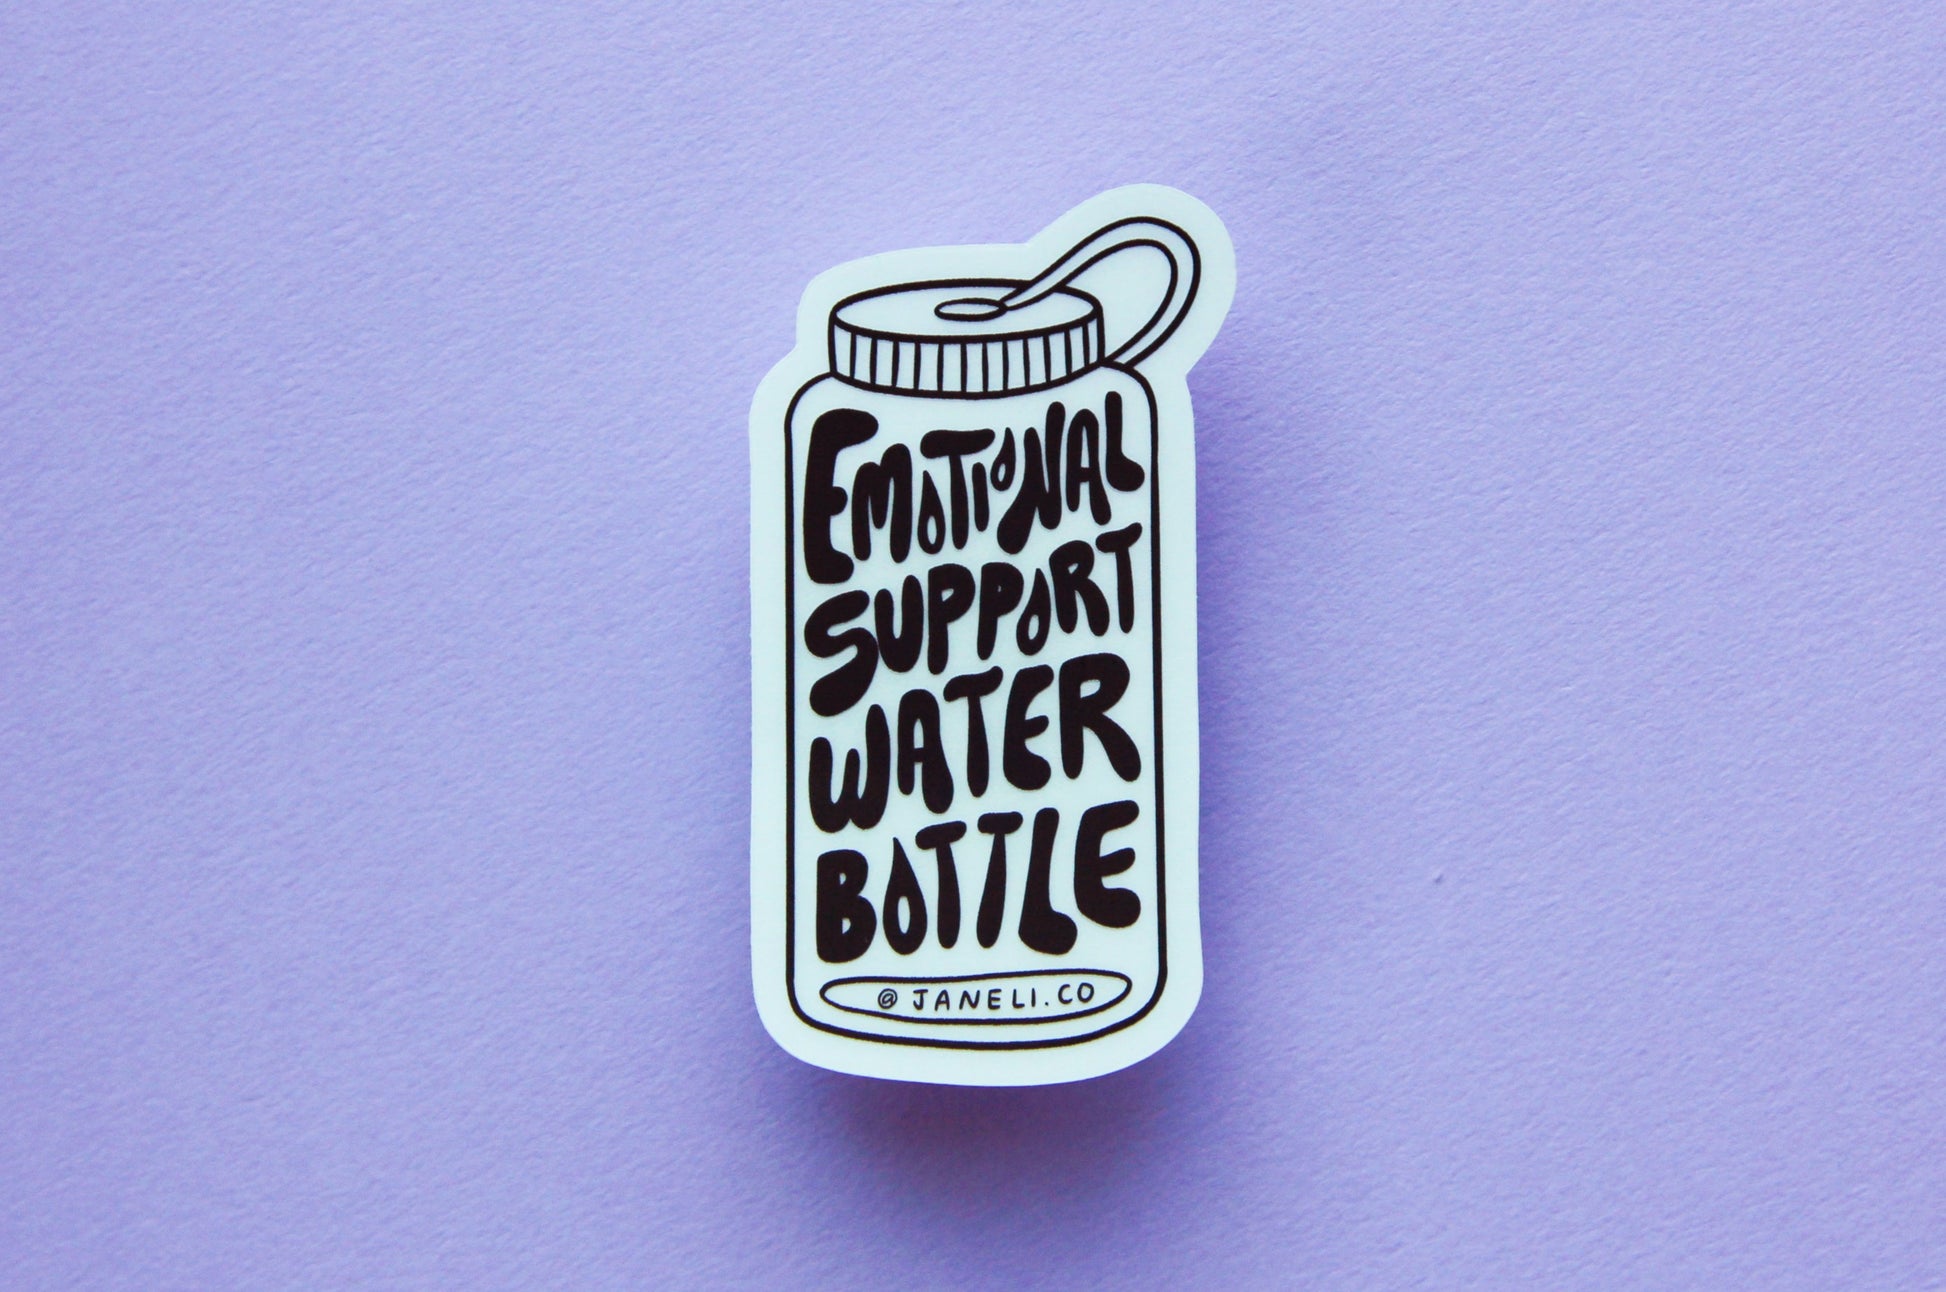 A JaneLi.Co sticker that says "Emotional Support Water Bottle" in the shape of a water bottle over a lavender background.